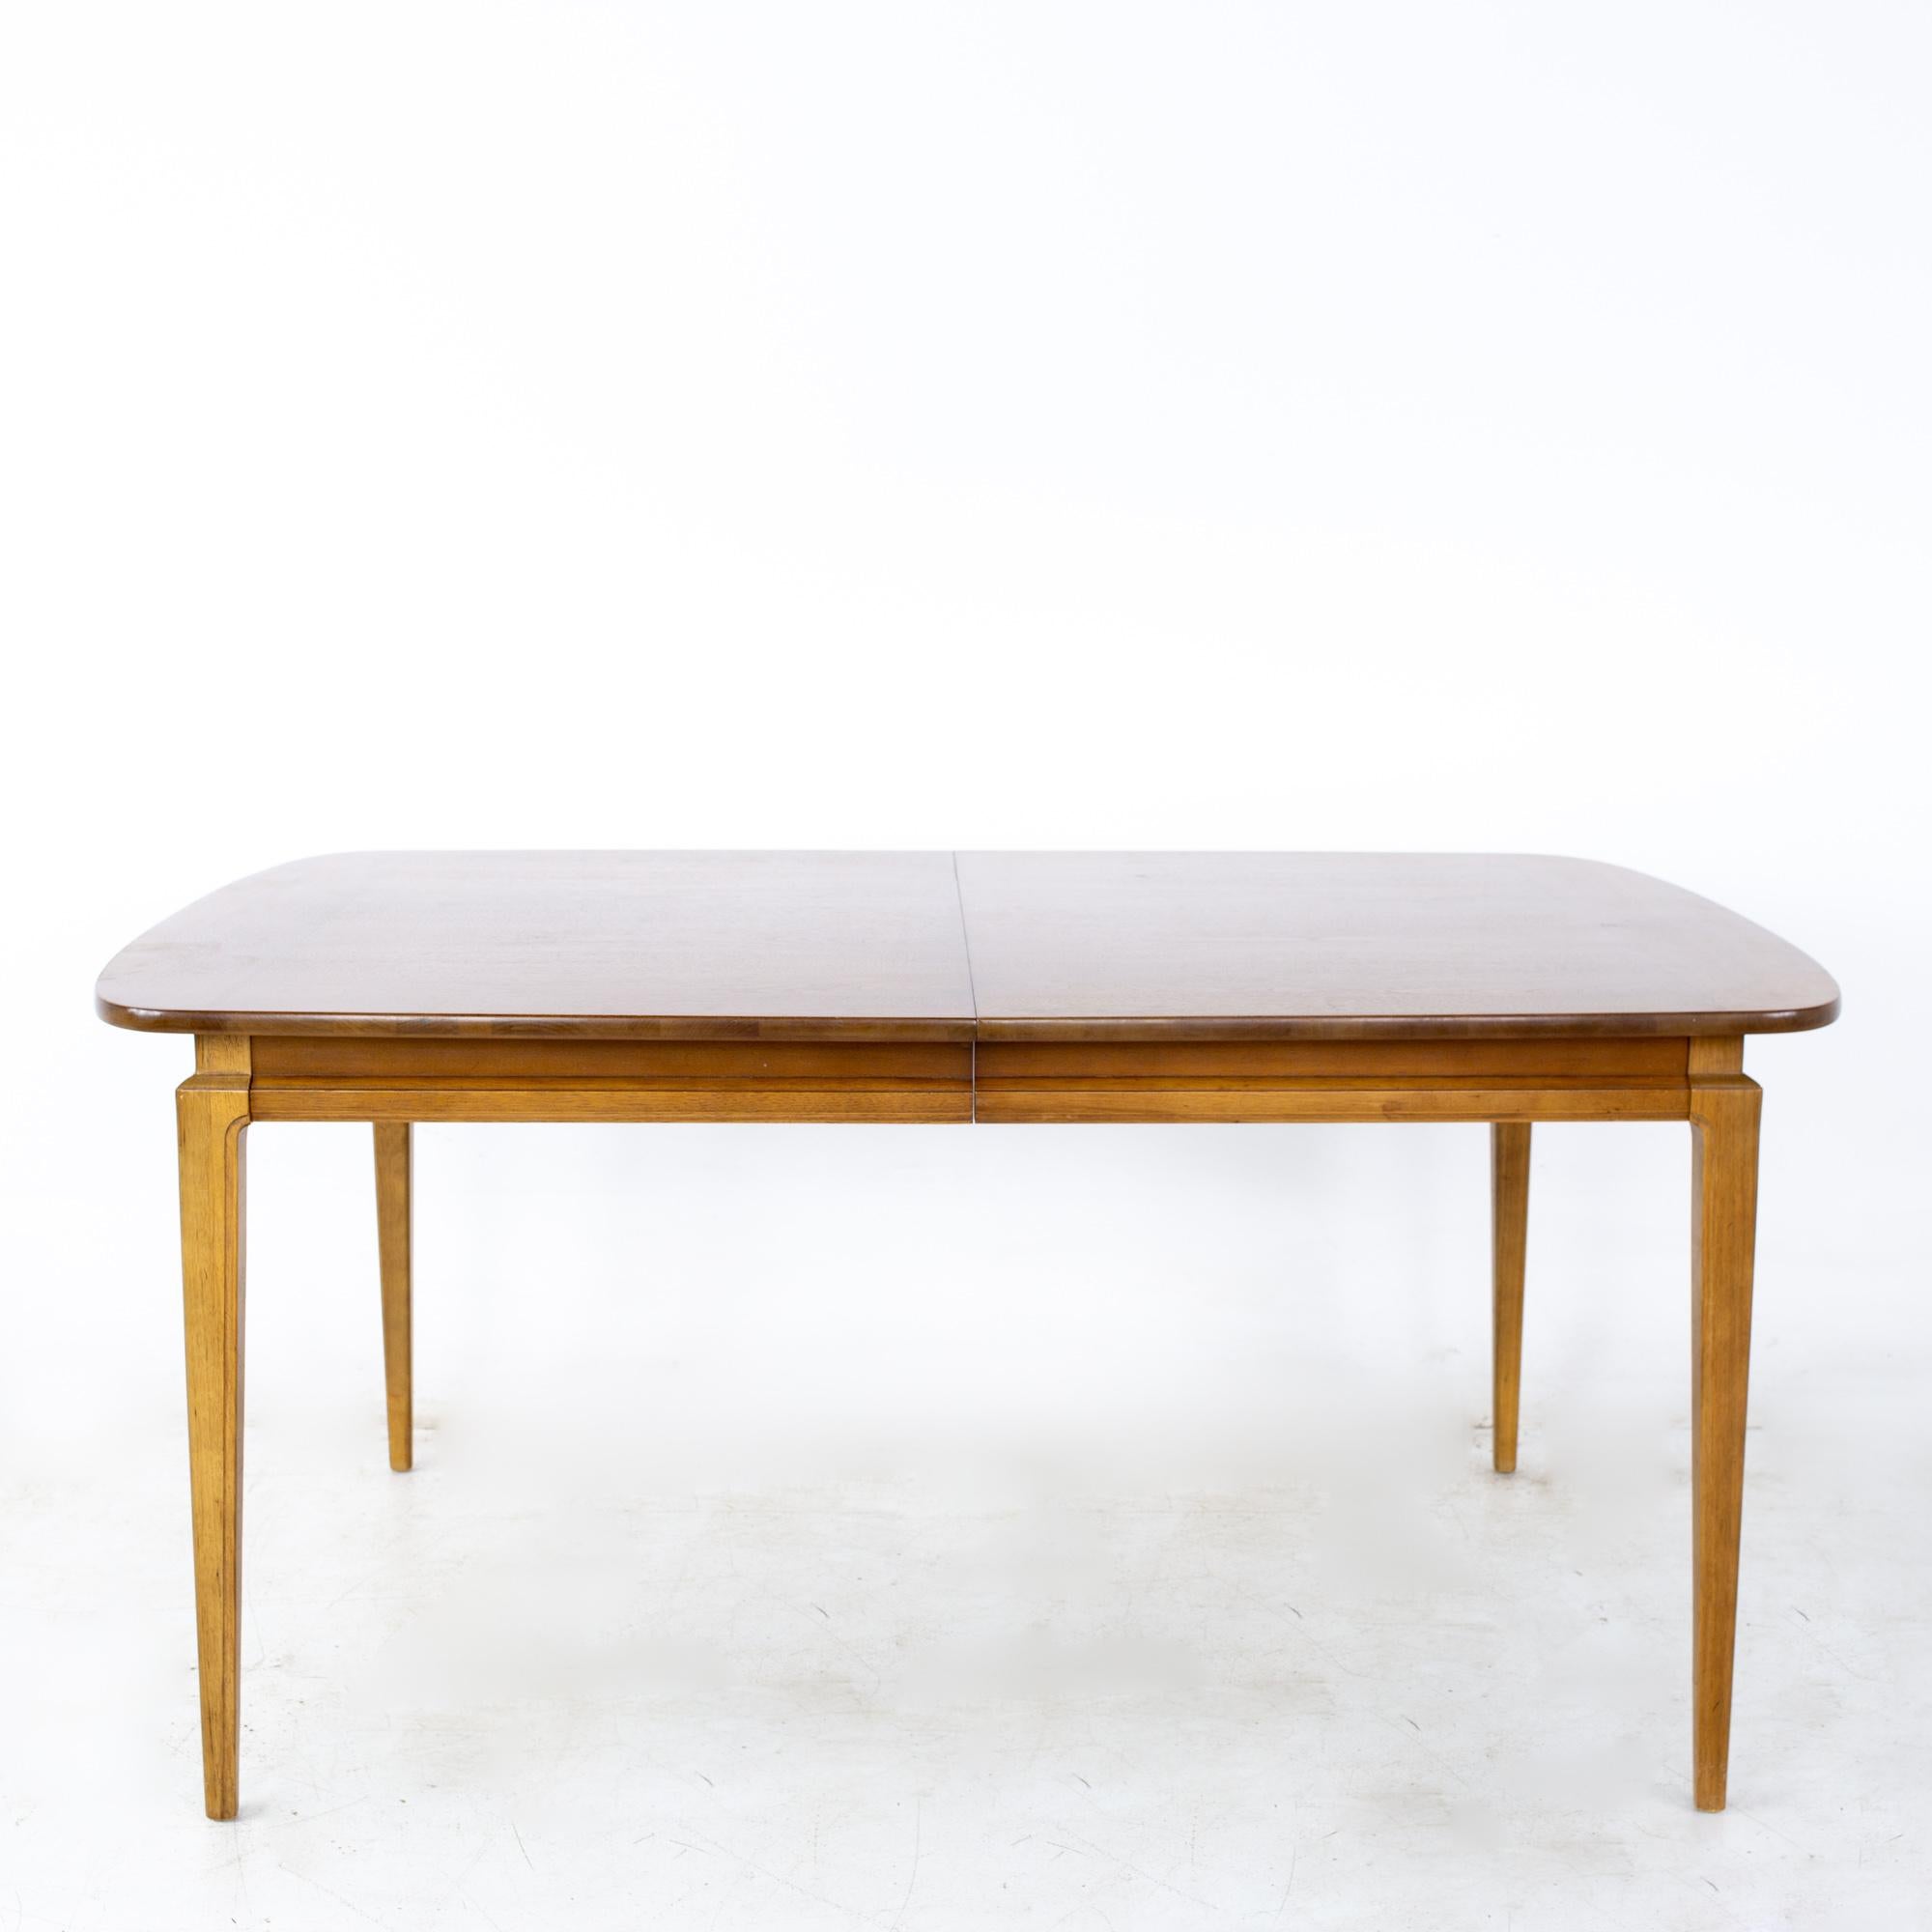 Dillingham style mid century walnut expanding 10 person dining table
Table measures: 62.25 wide x 42 deep x 29.25 inches high; each leaf is 18 inches wide, making a maximum table width of 98.25 inches when both leaves are used and has a chair